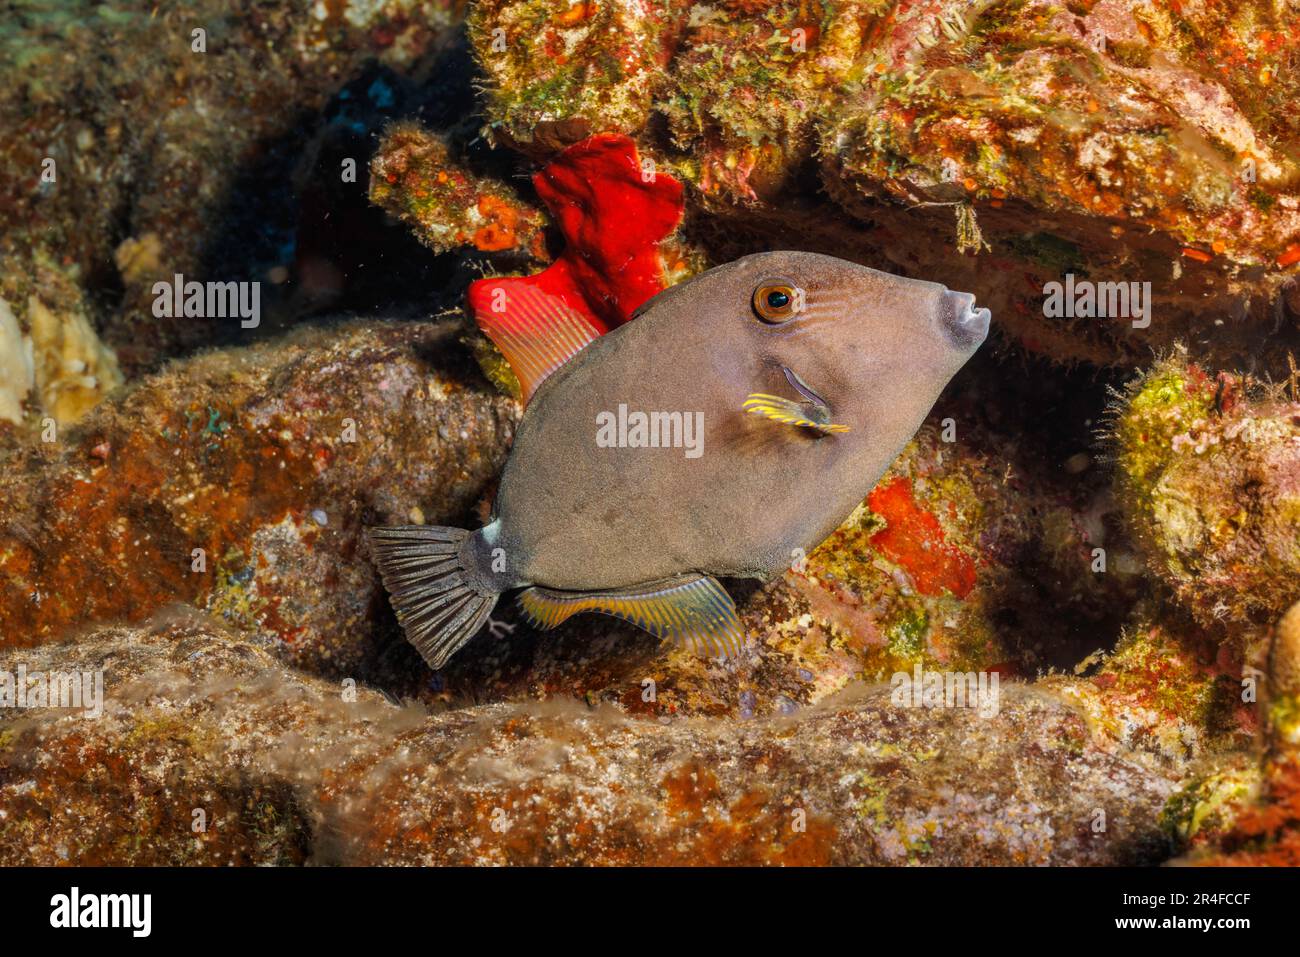 The squaretail filefish, Cantherhines sandwichiensis, was first identified in Hawaii and thought to be endemic. It has since been found in the South P Stock Photo